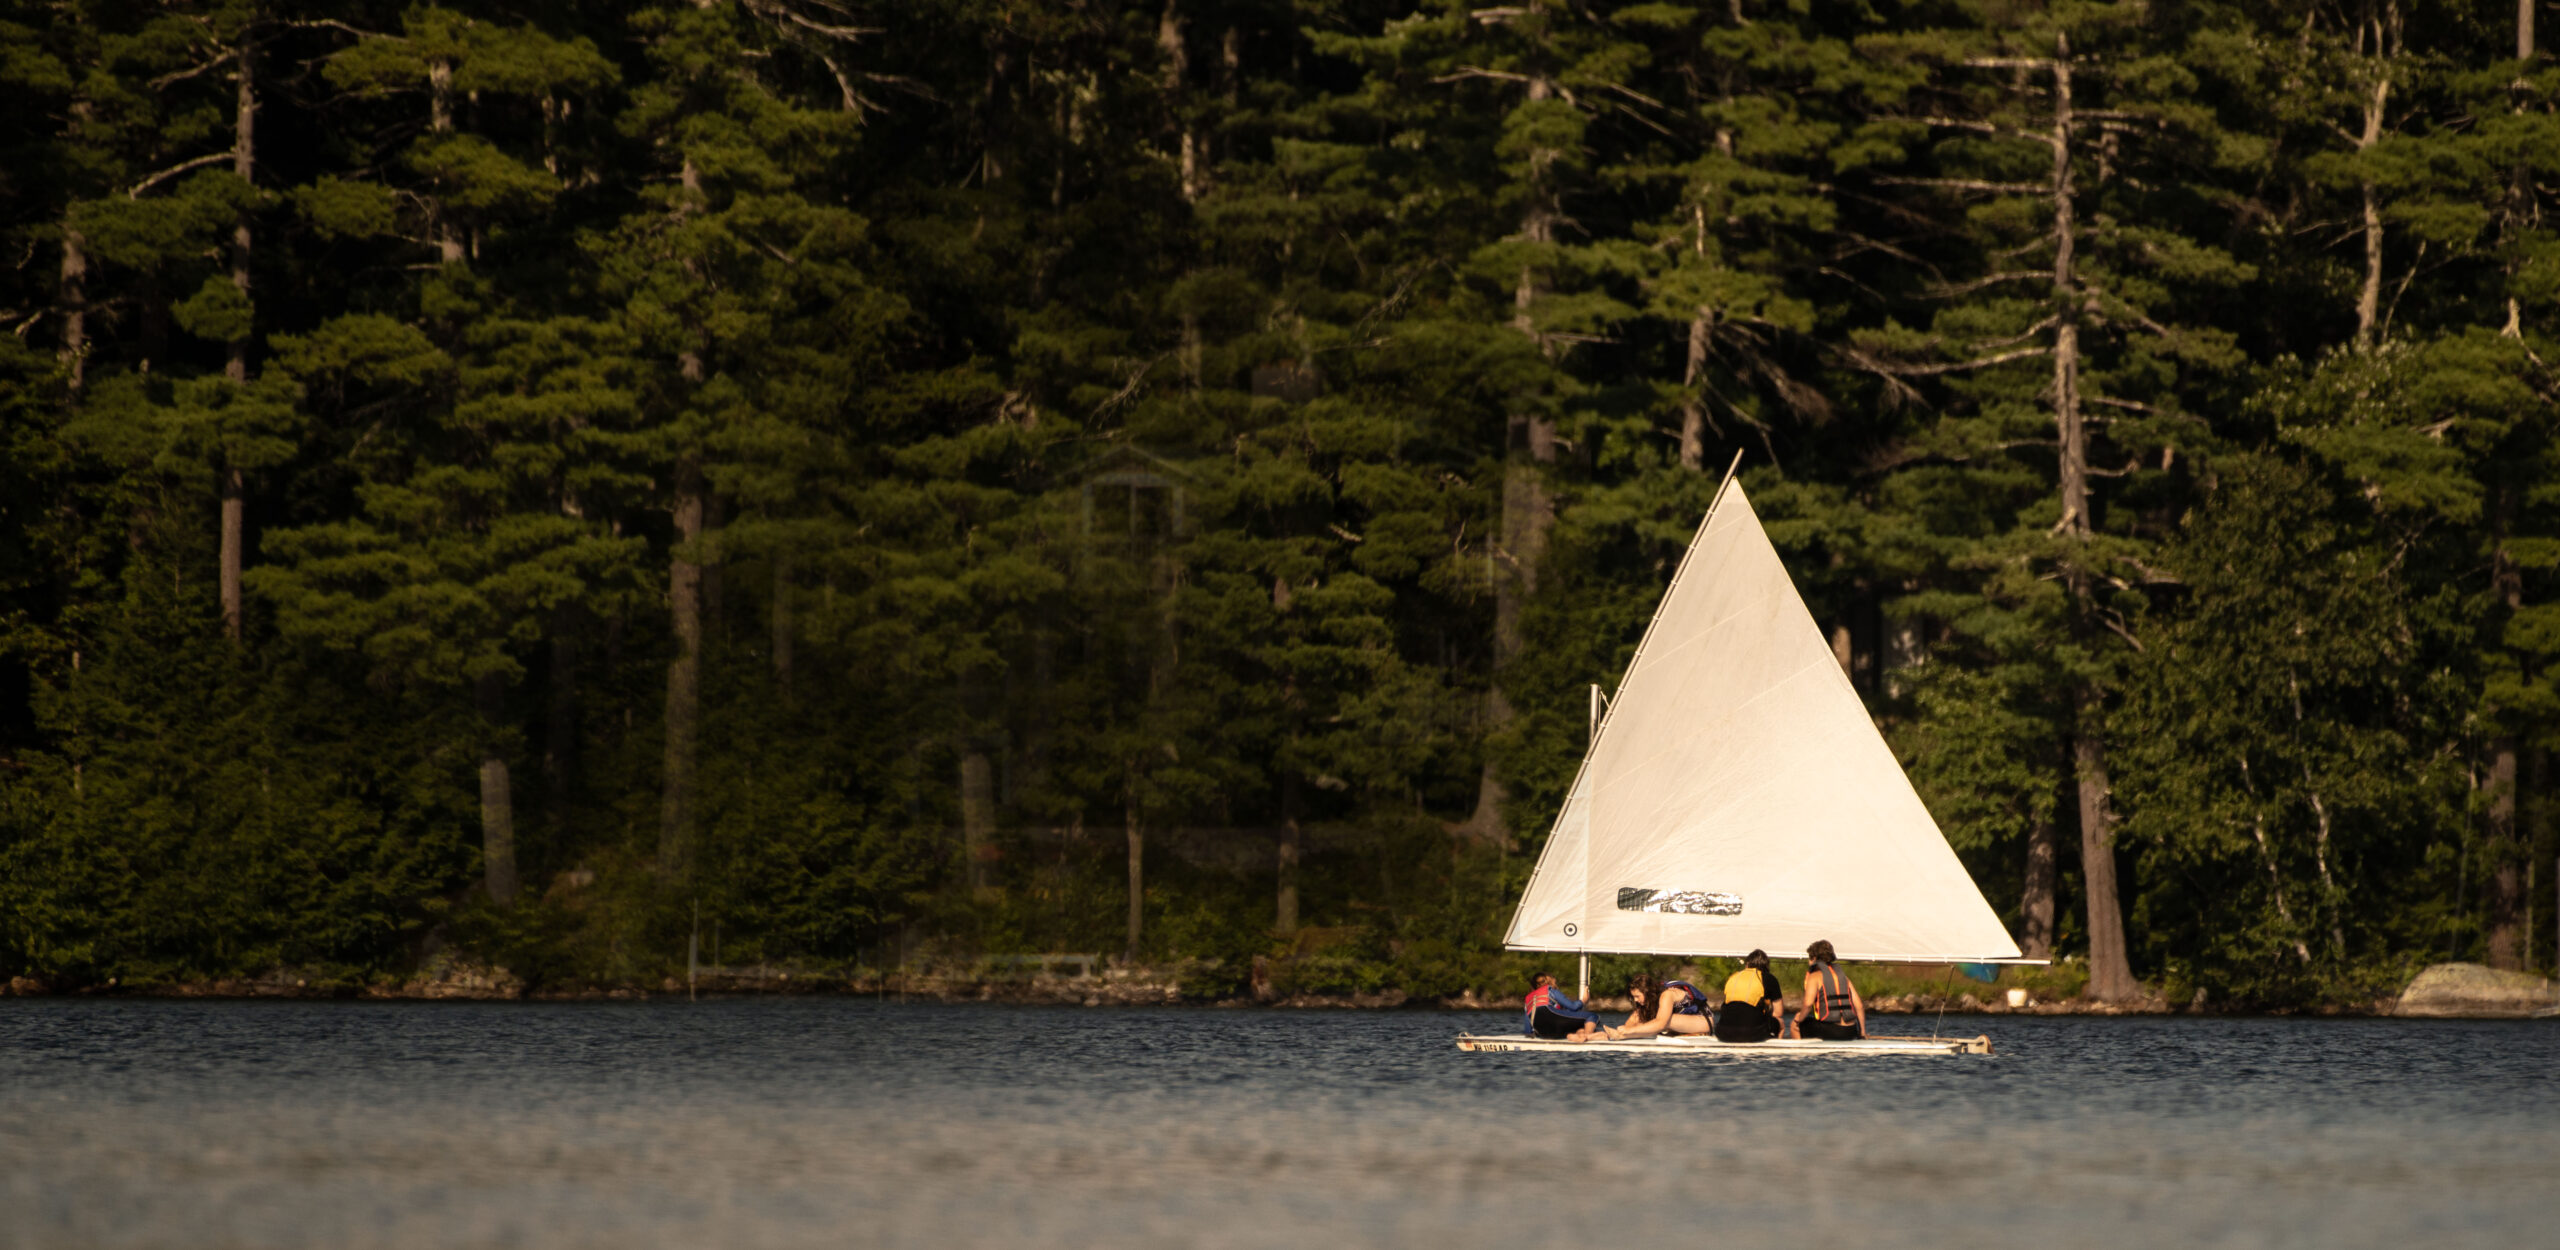 A Sunfish sailboat with four kids on it sailing on Lovell Lake.